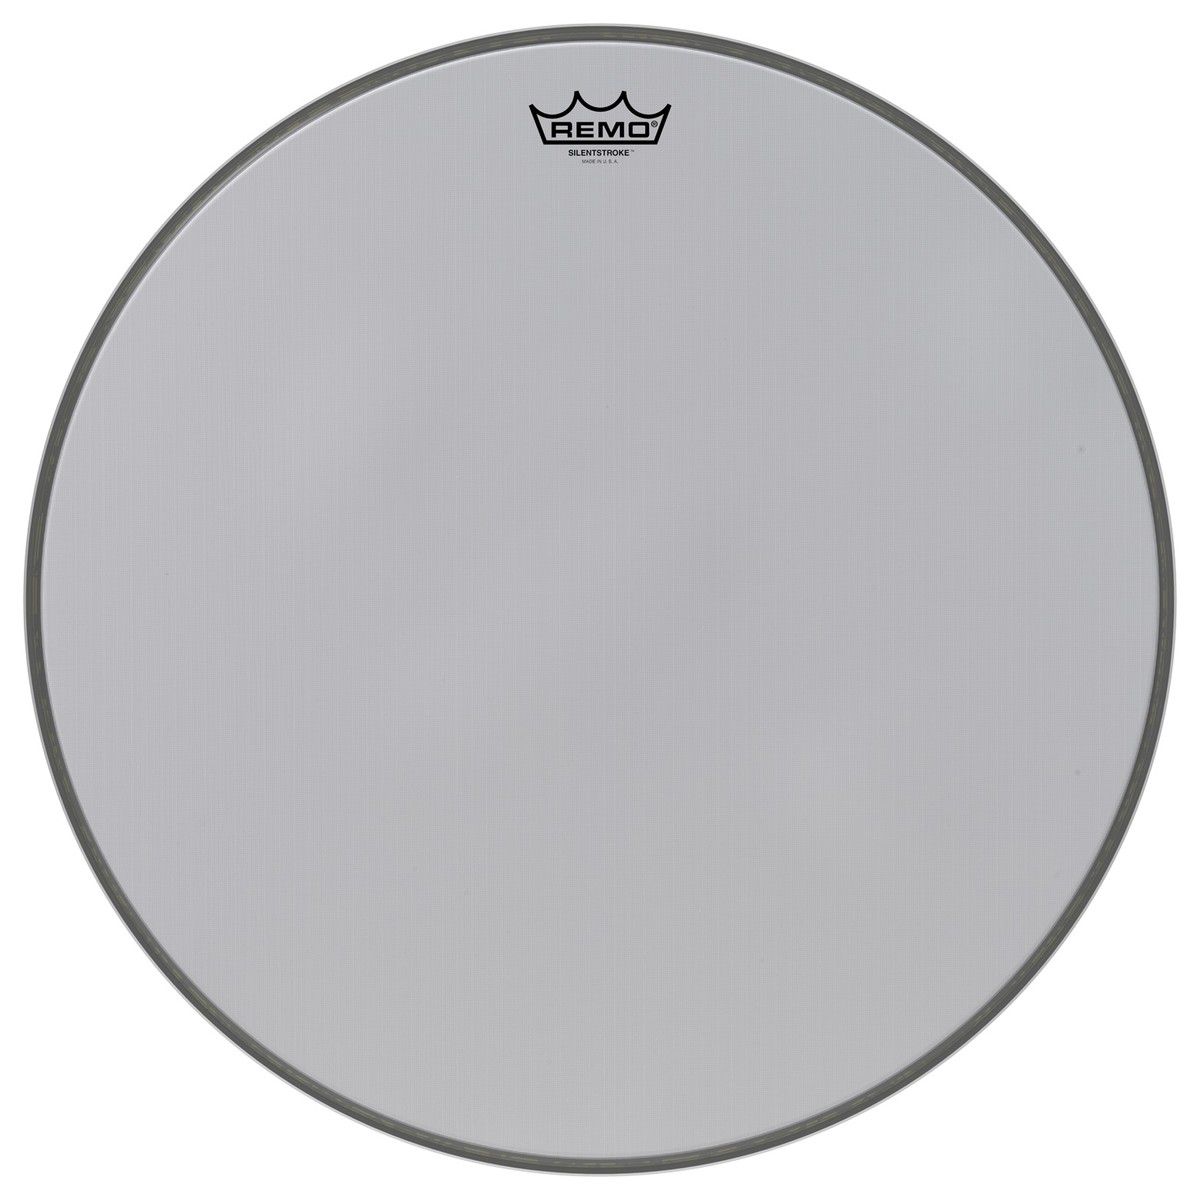 An image of Remo 20 inch Silentstroke Drum Head | PMT Online